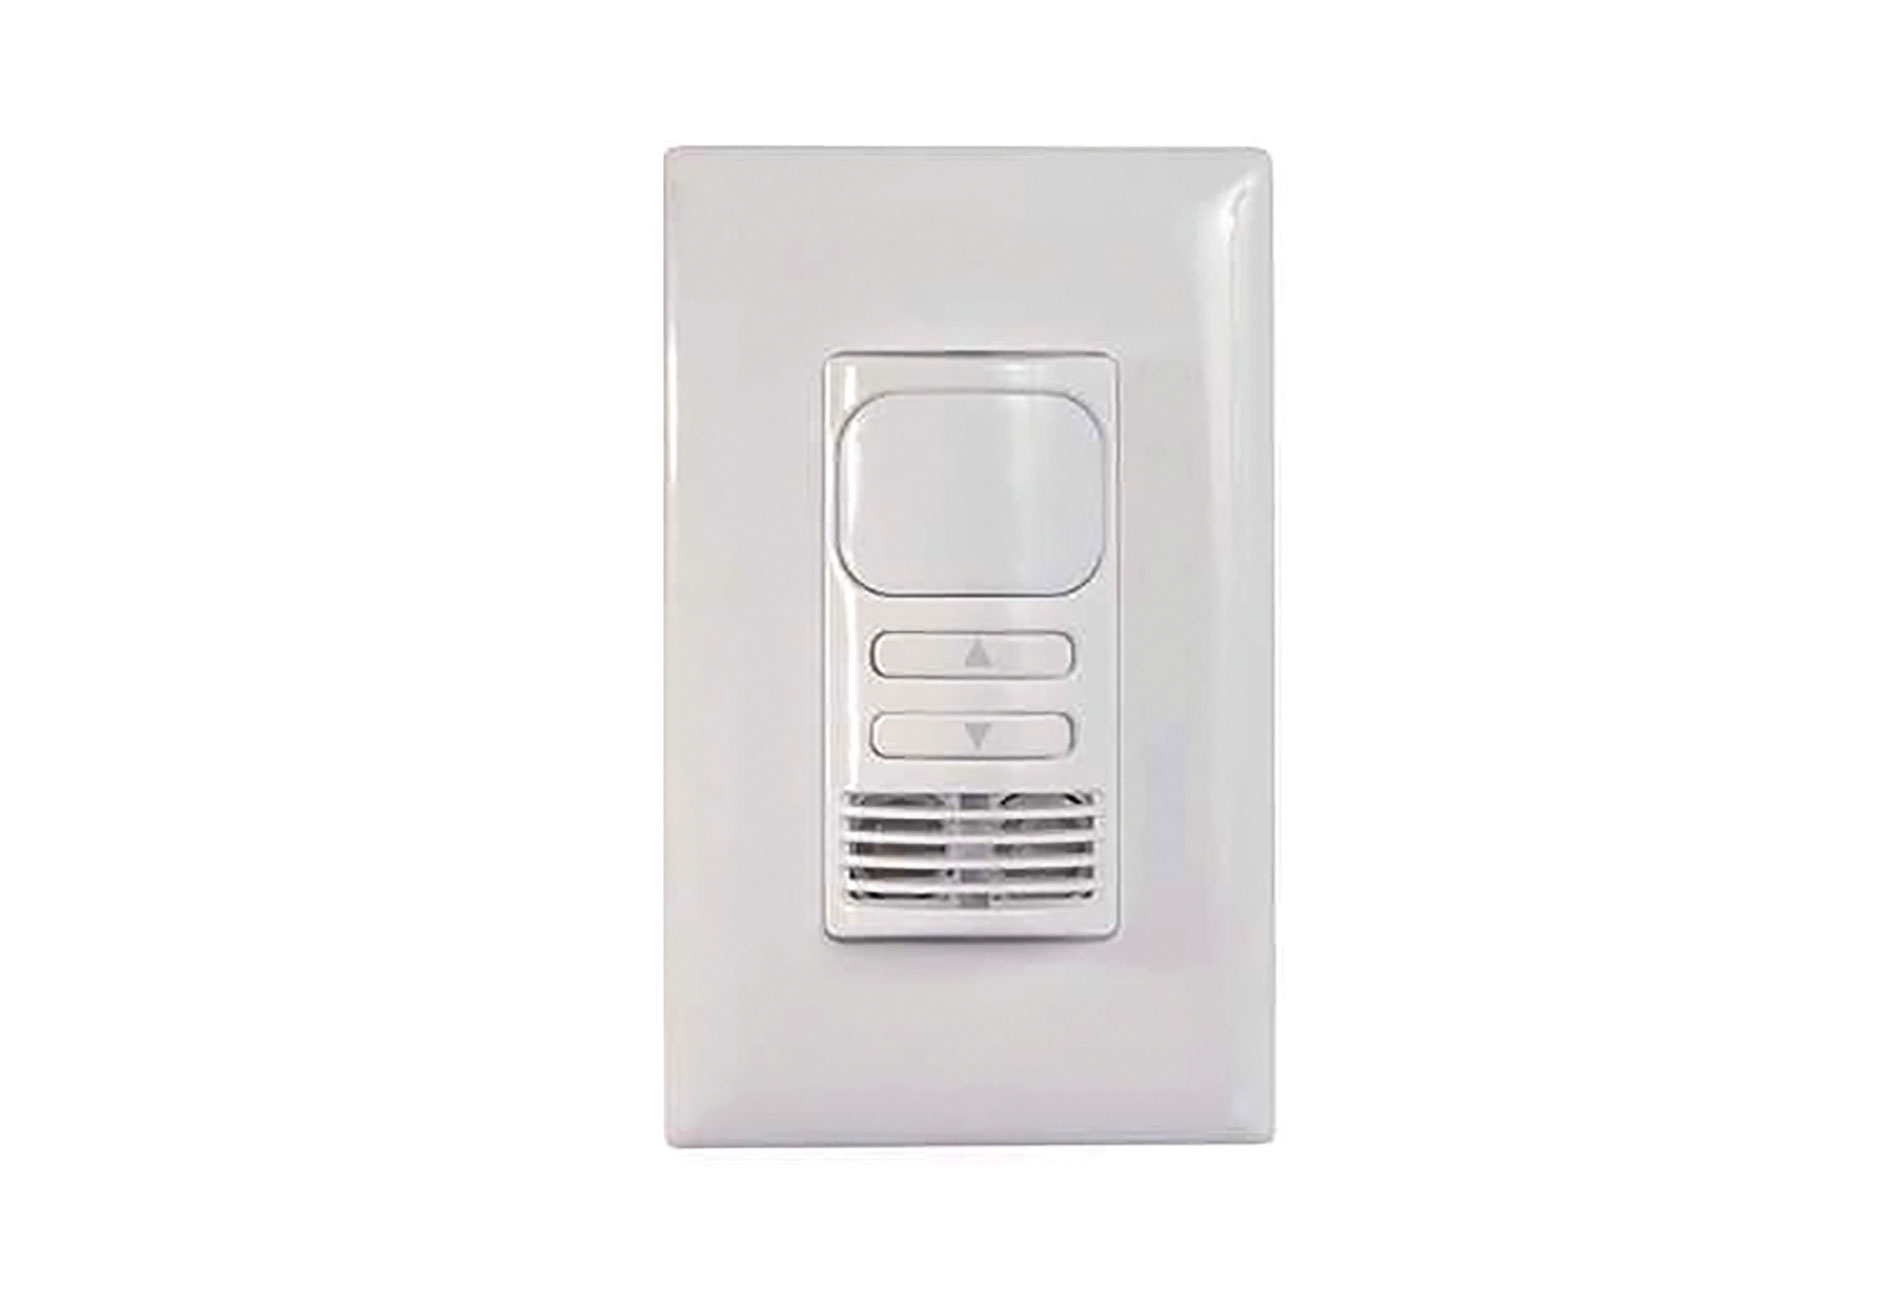 Hubbell Control Solutions’ LightHawk Wall Switch